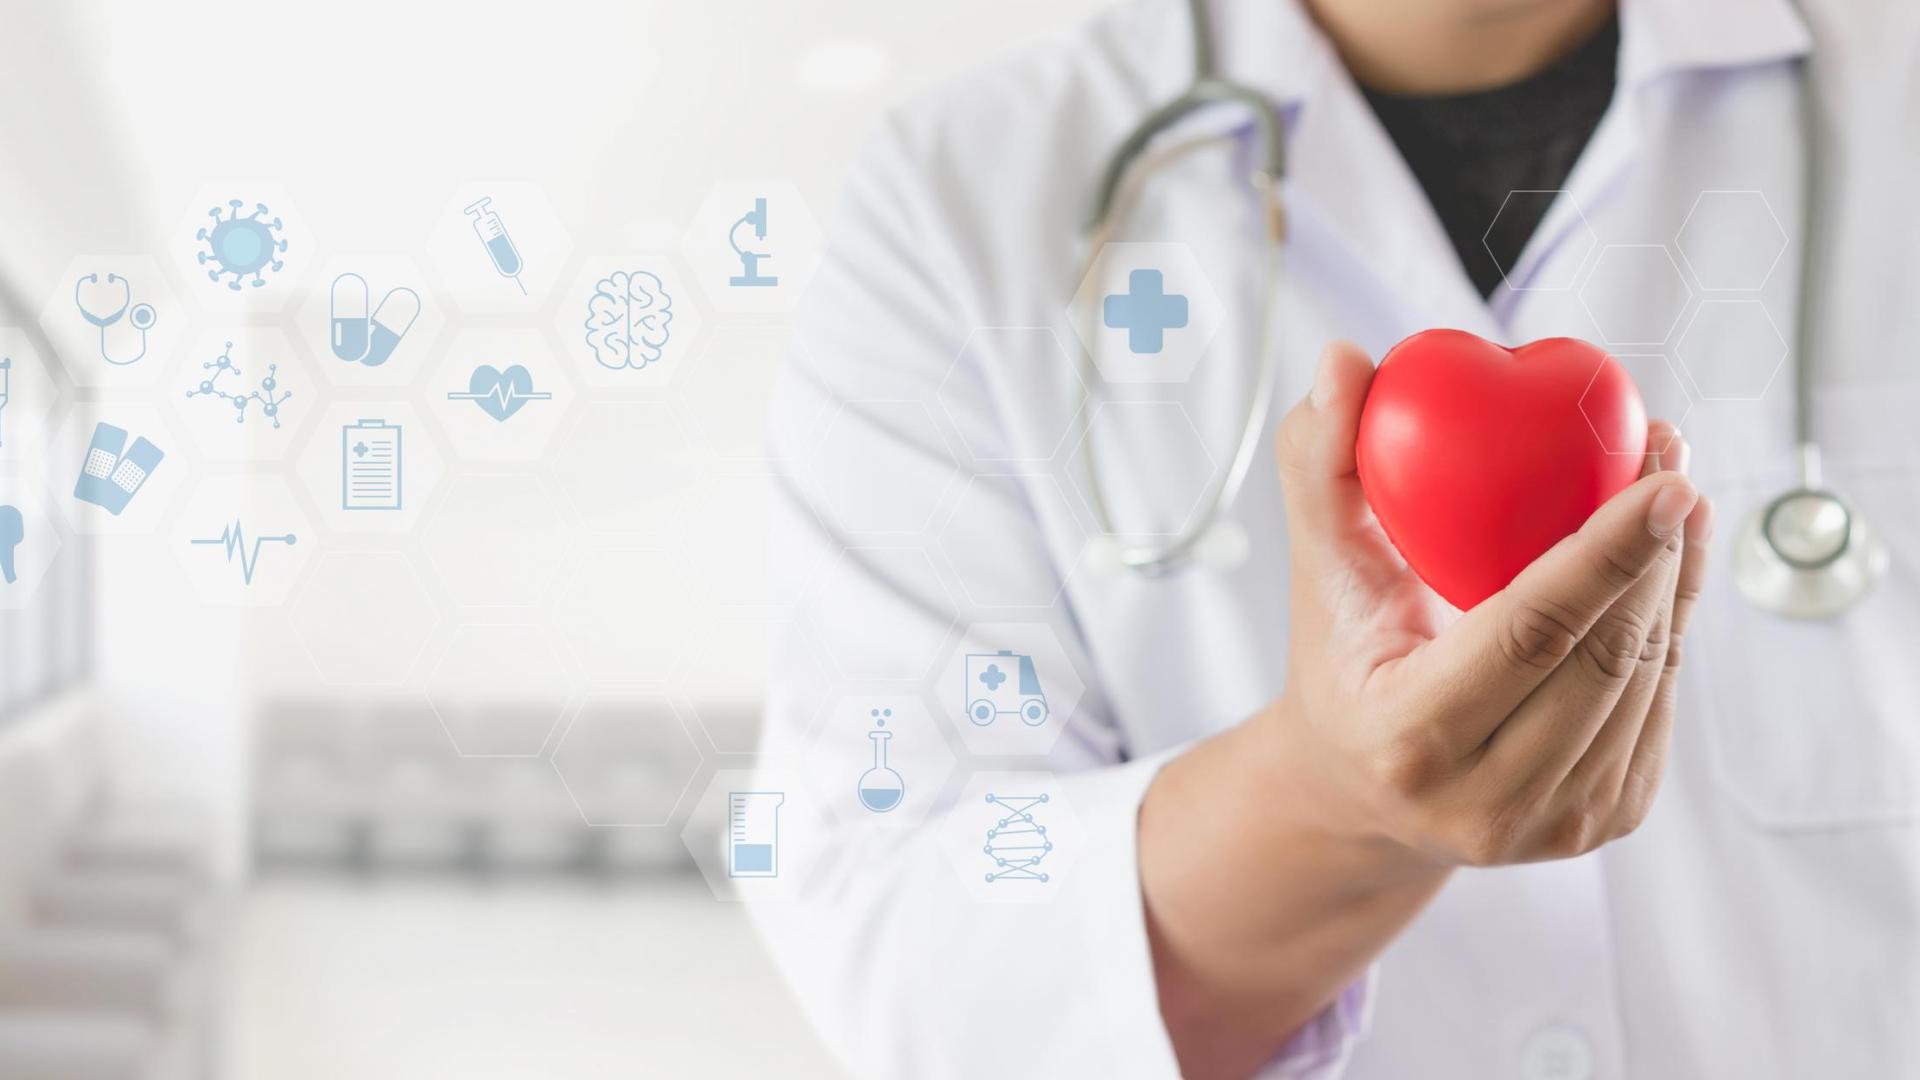 stock photo of medical professional holding apple